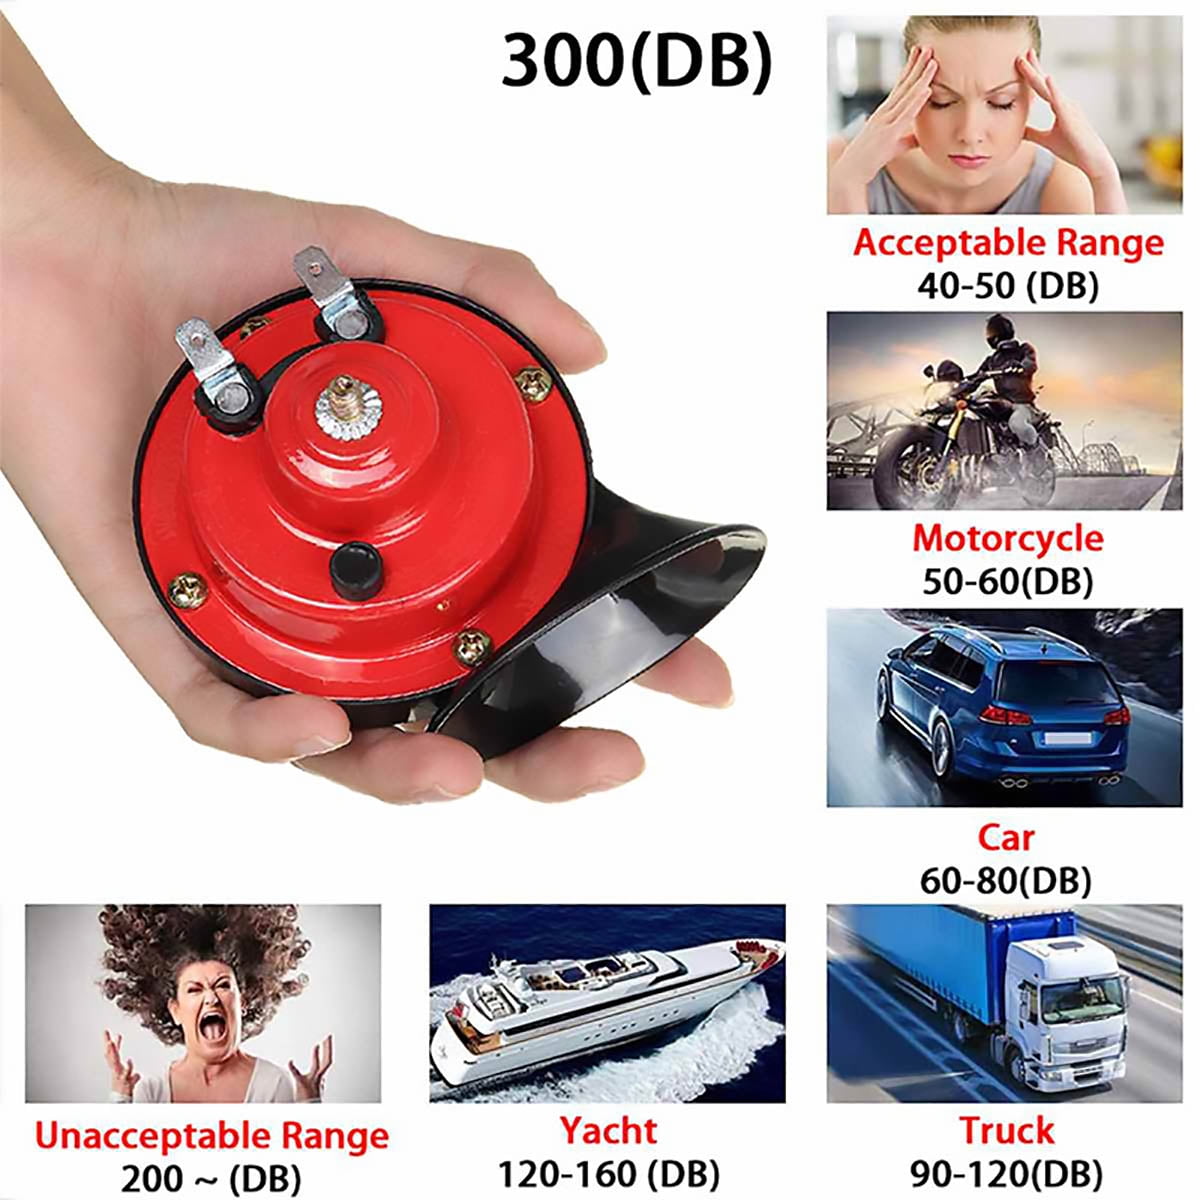 12V 300DB Super Loud Train Horn Waterproof for Motorcycle Car Truck SUV  BoatOpen